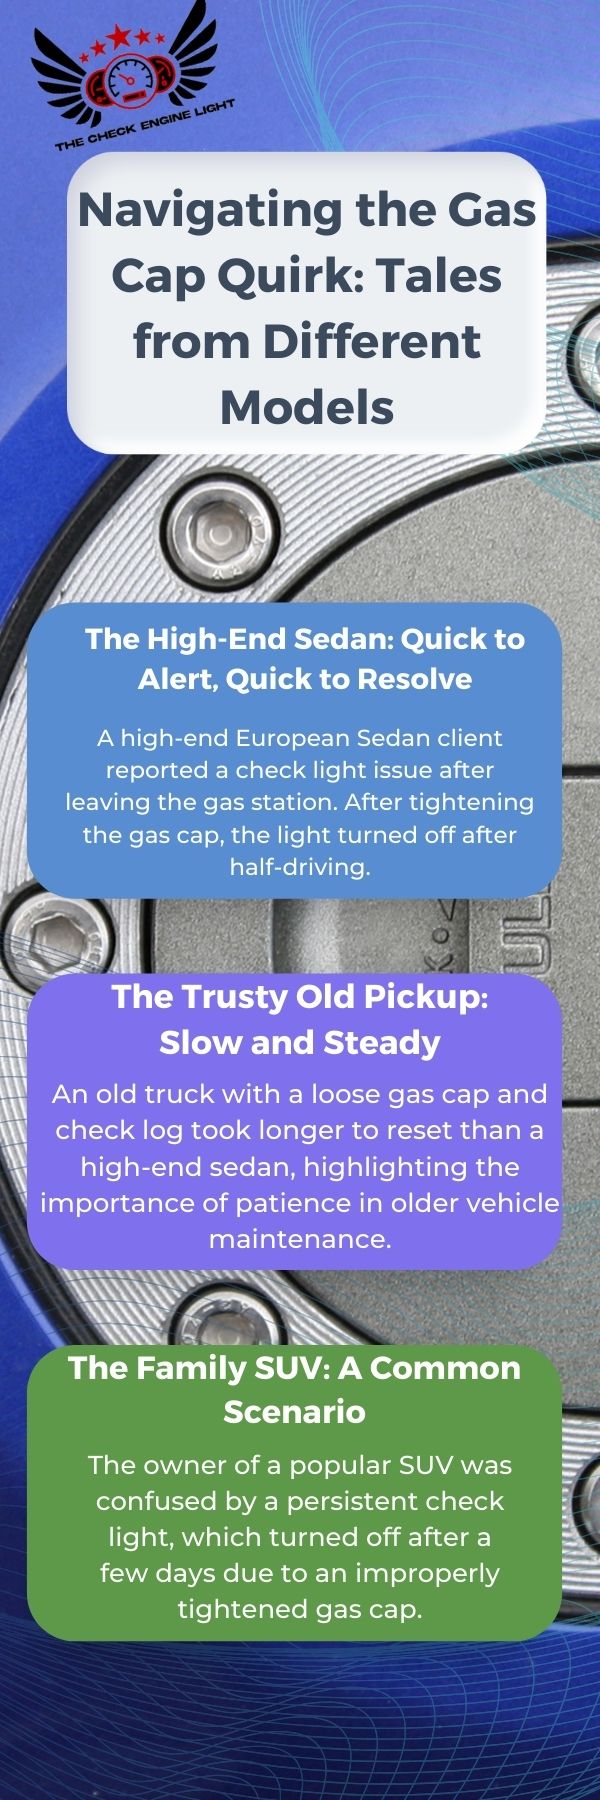 an infographic about Navigating the Gas Cap Quirk: Tales from Different Models